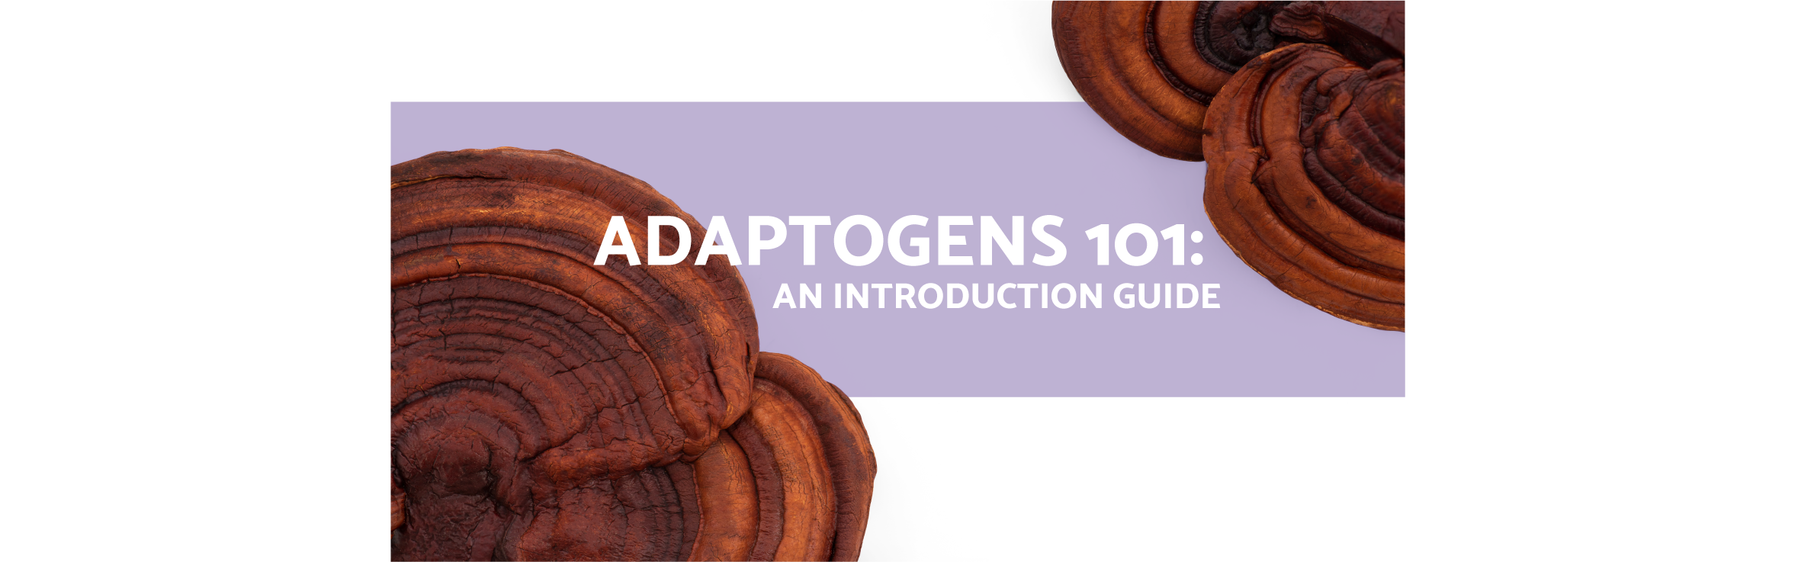 Adaptogens 101- An introduction Guide